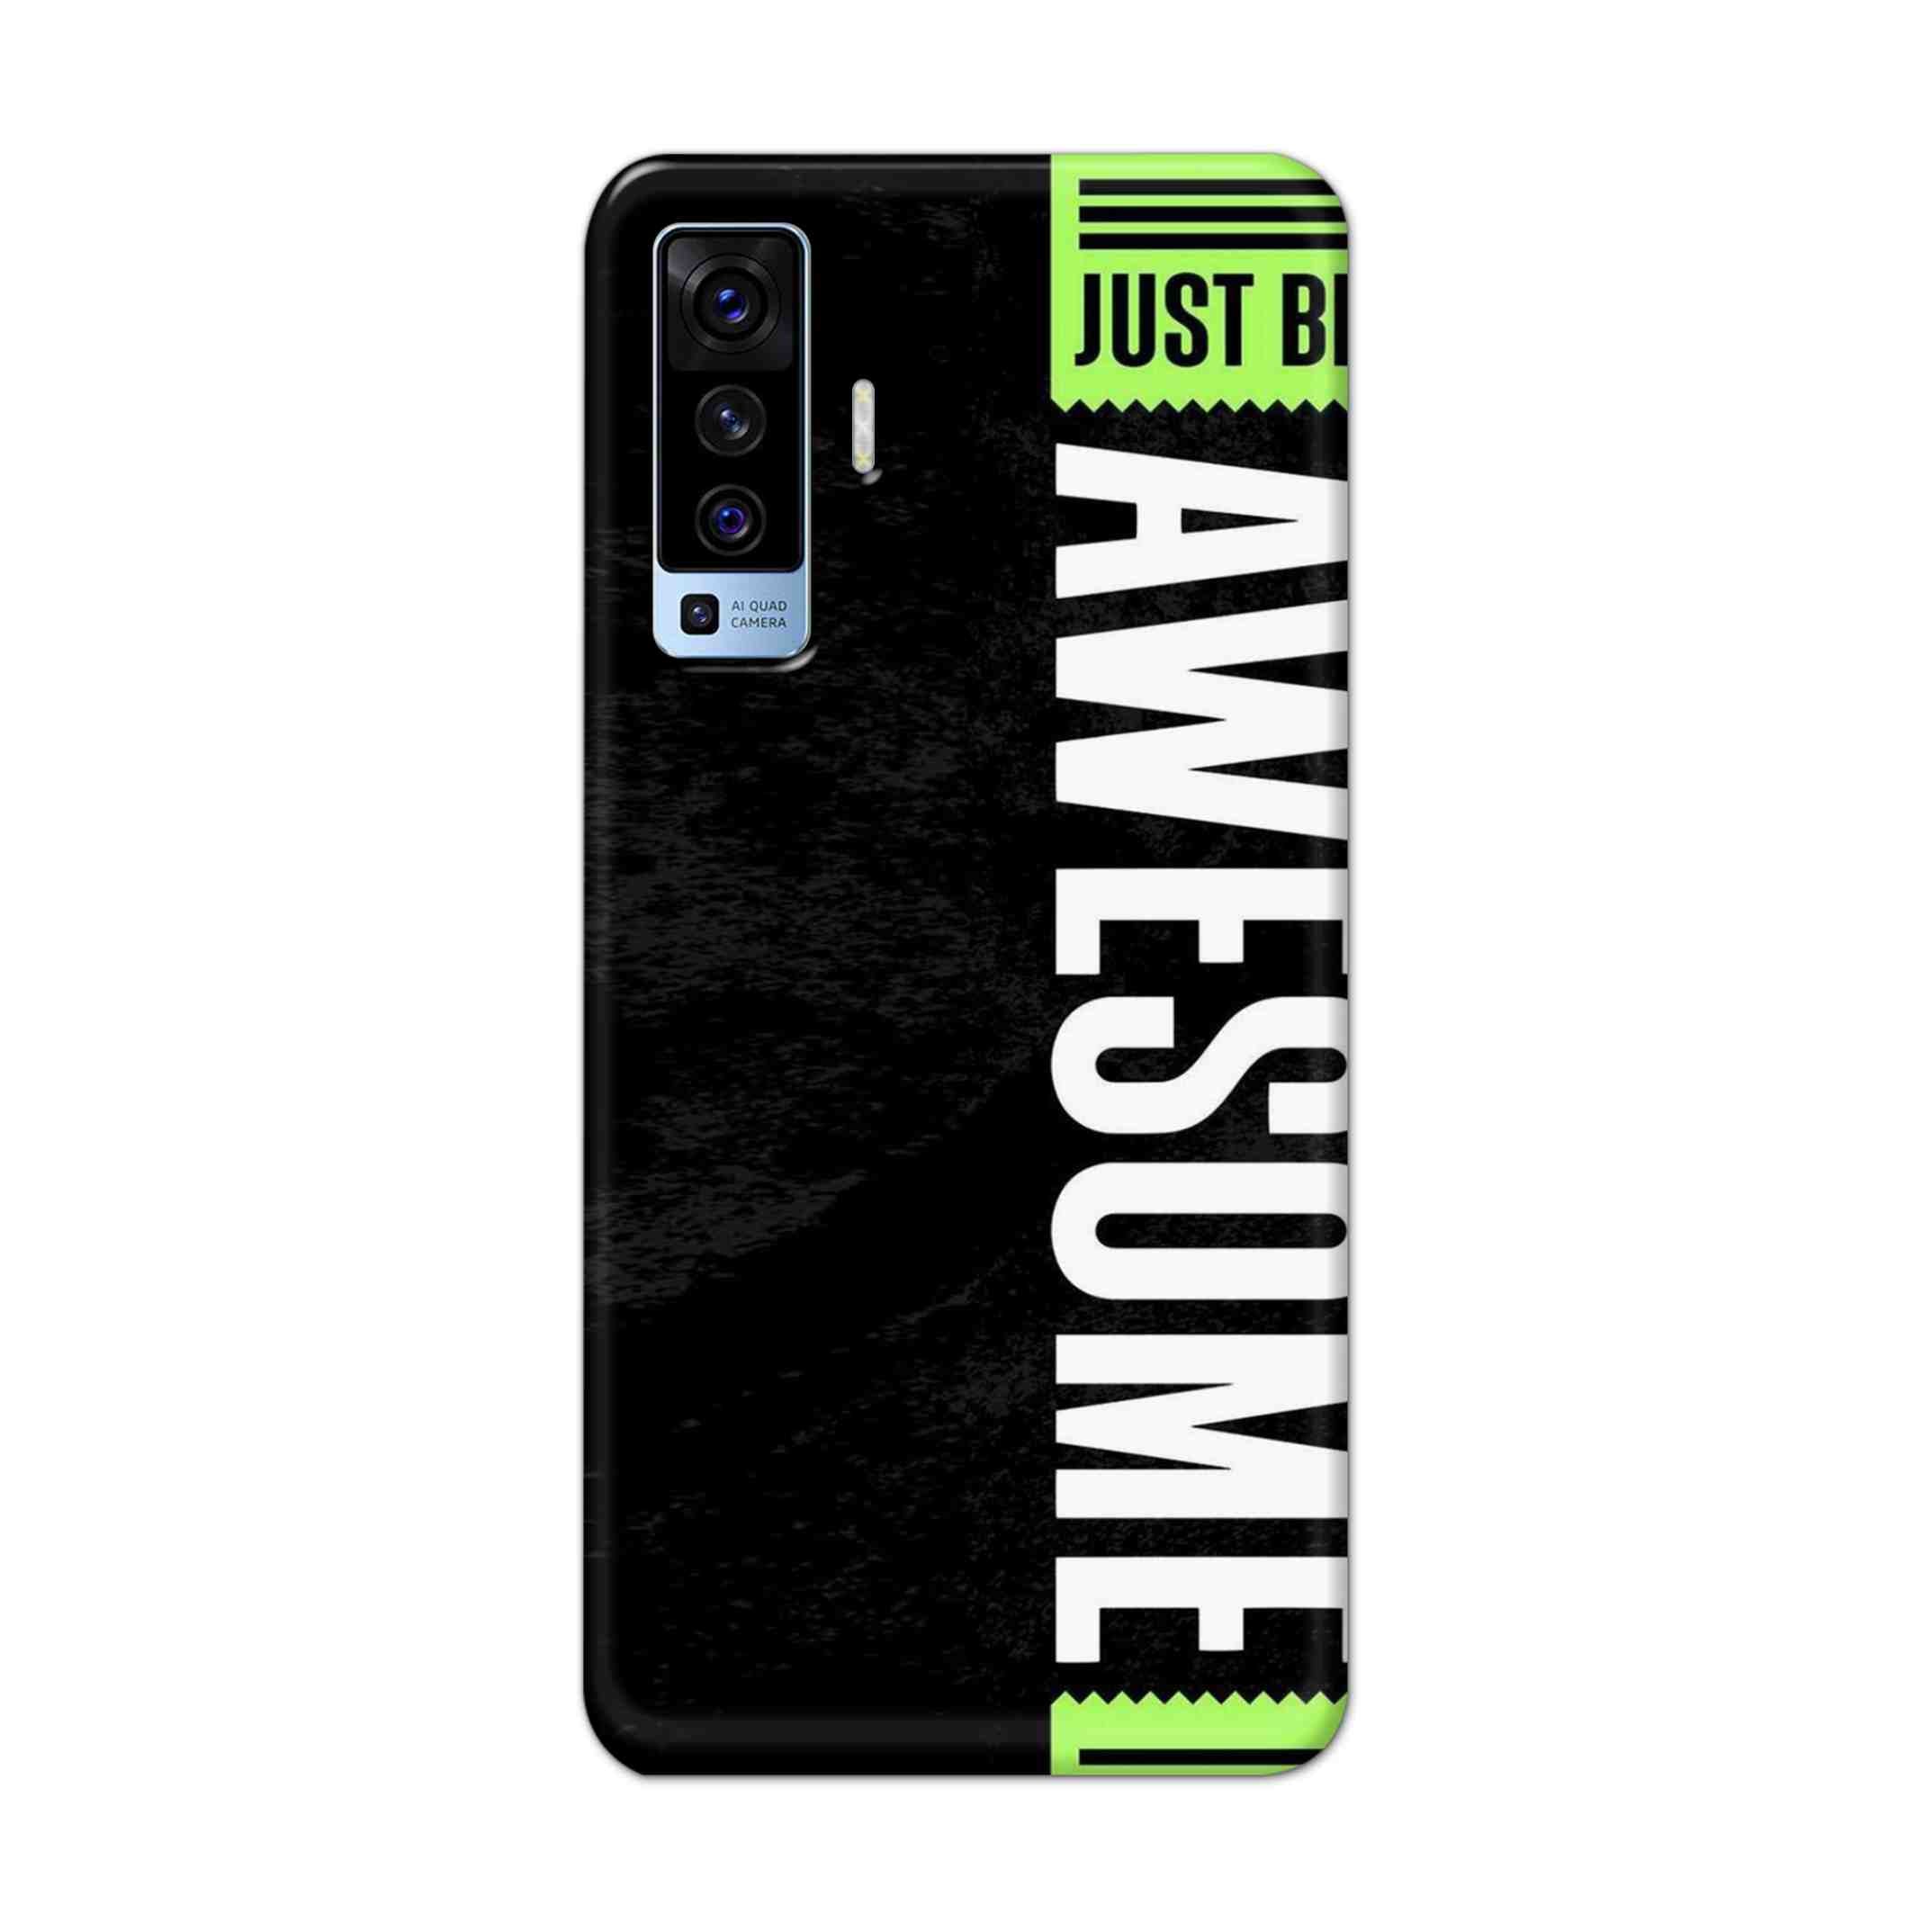 Buy Awesome Street Hard Back Mobile Phone Case Cover For Vivo X50 Online